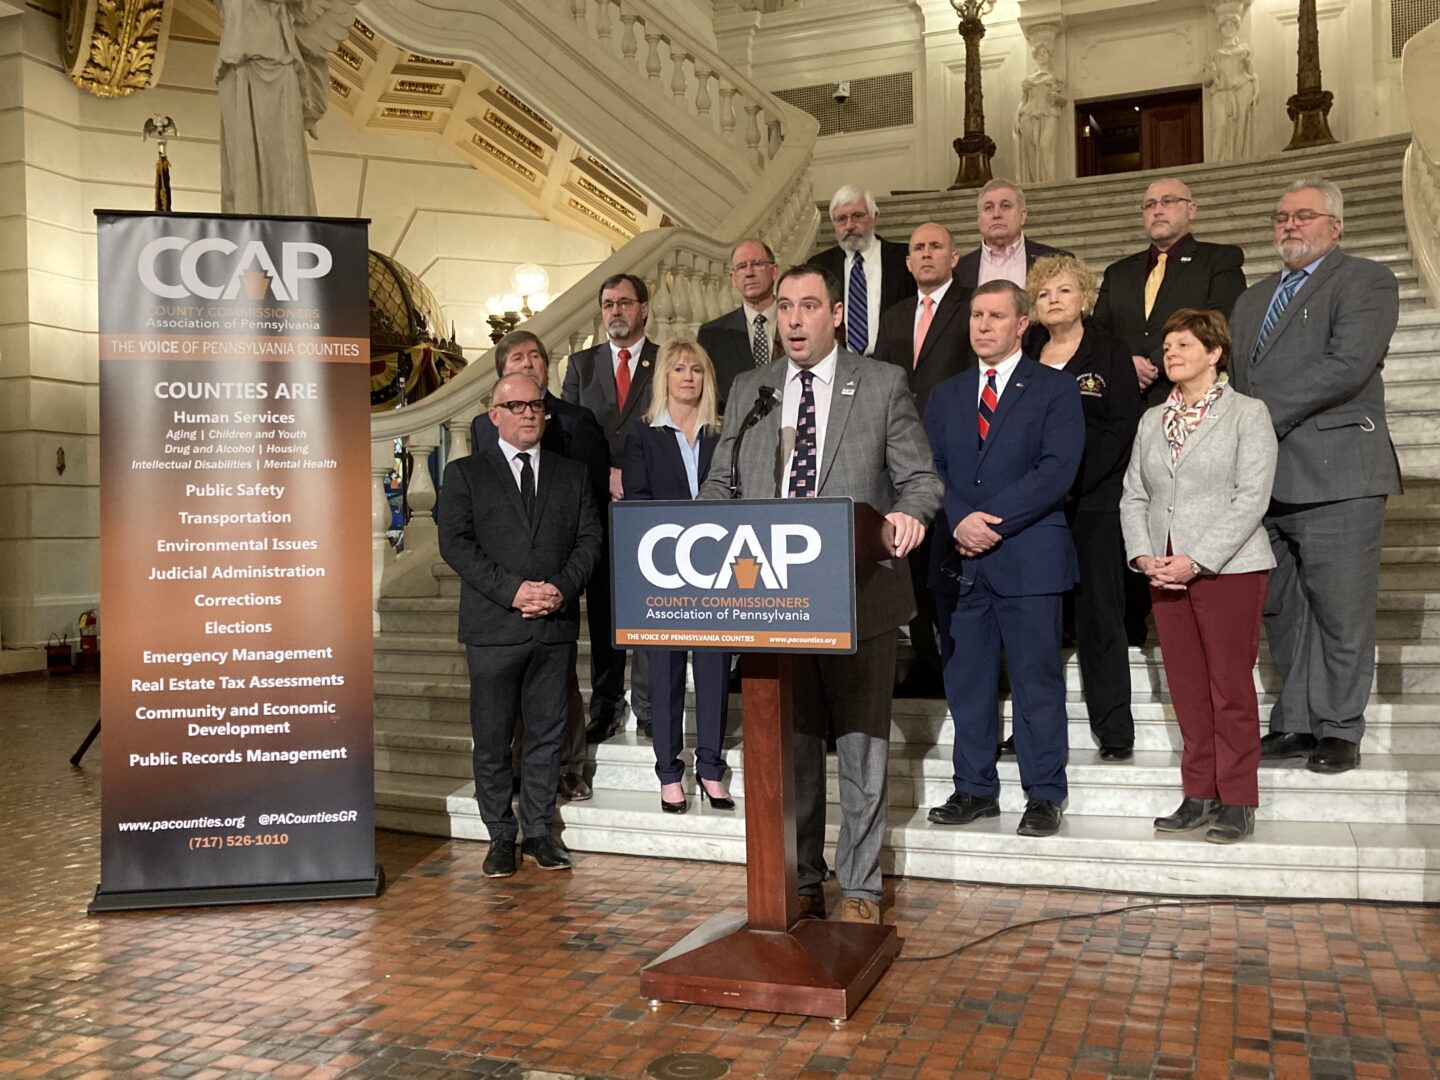 County Commissioner Association of Pennsylvania President Chip Abramovic, flanked by other county commissioners, speaks at a press conference in Harrisburg on Jan. 25, 2023.